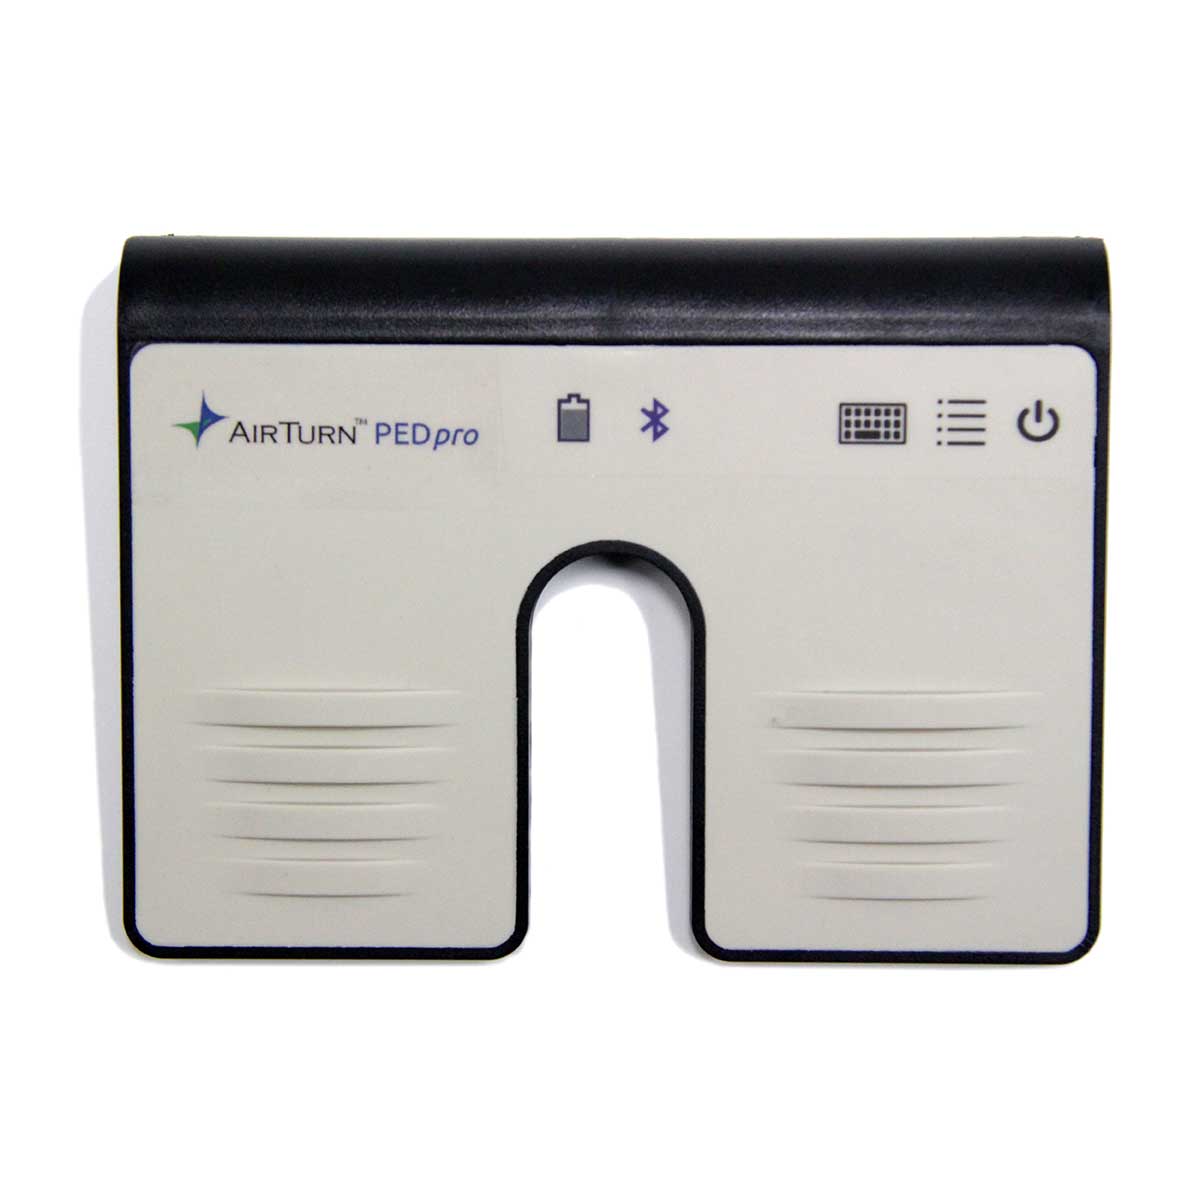 AirTurn PEDpro Low-profile, silent, and portable wireless foot switch.